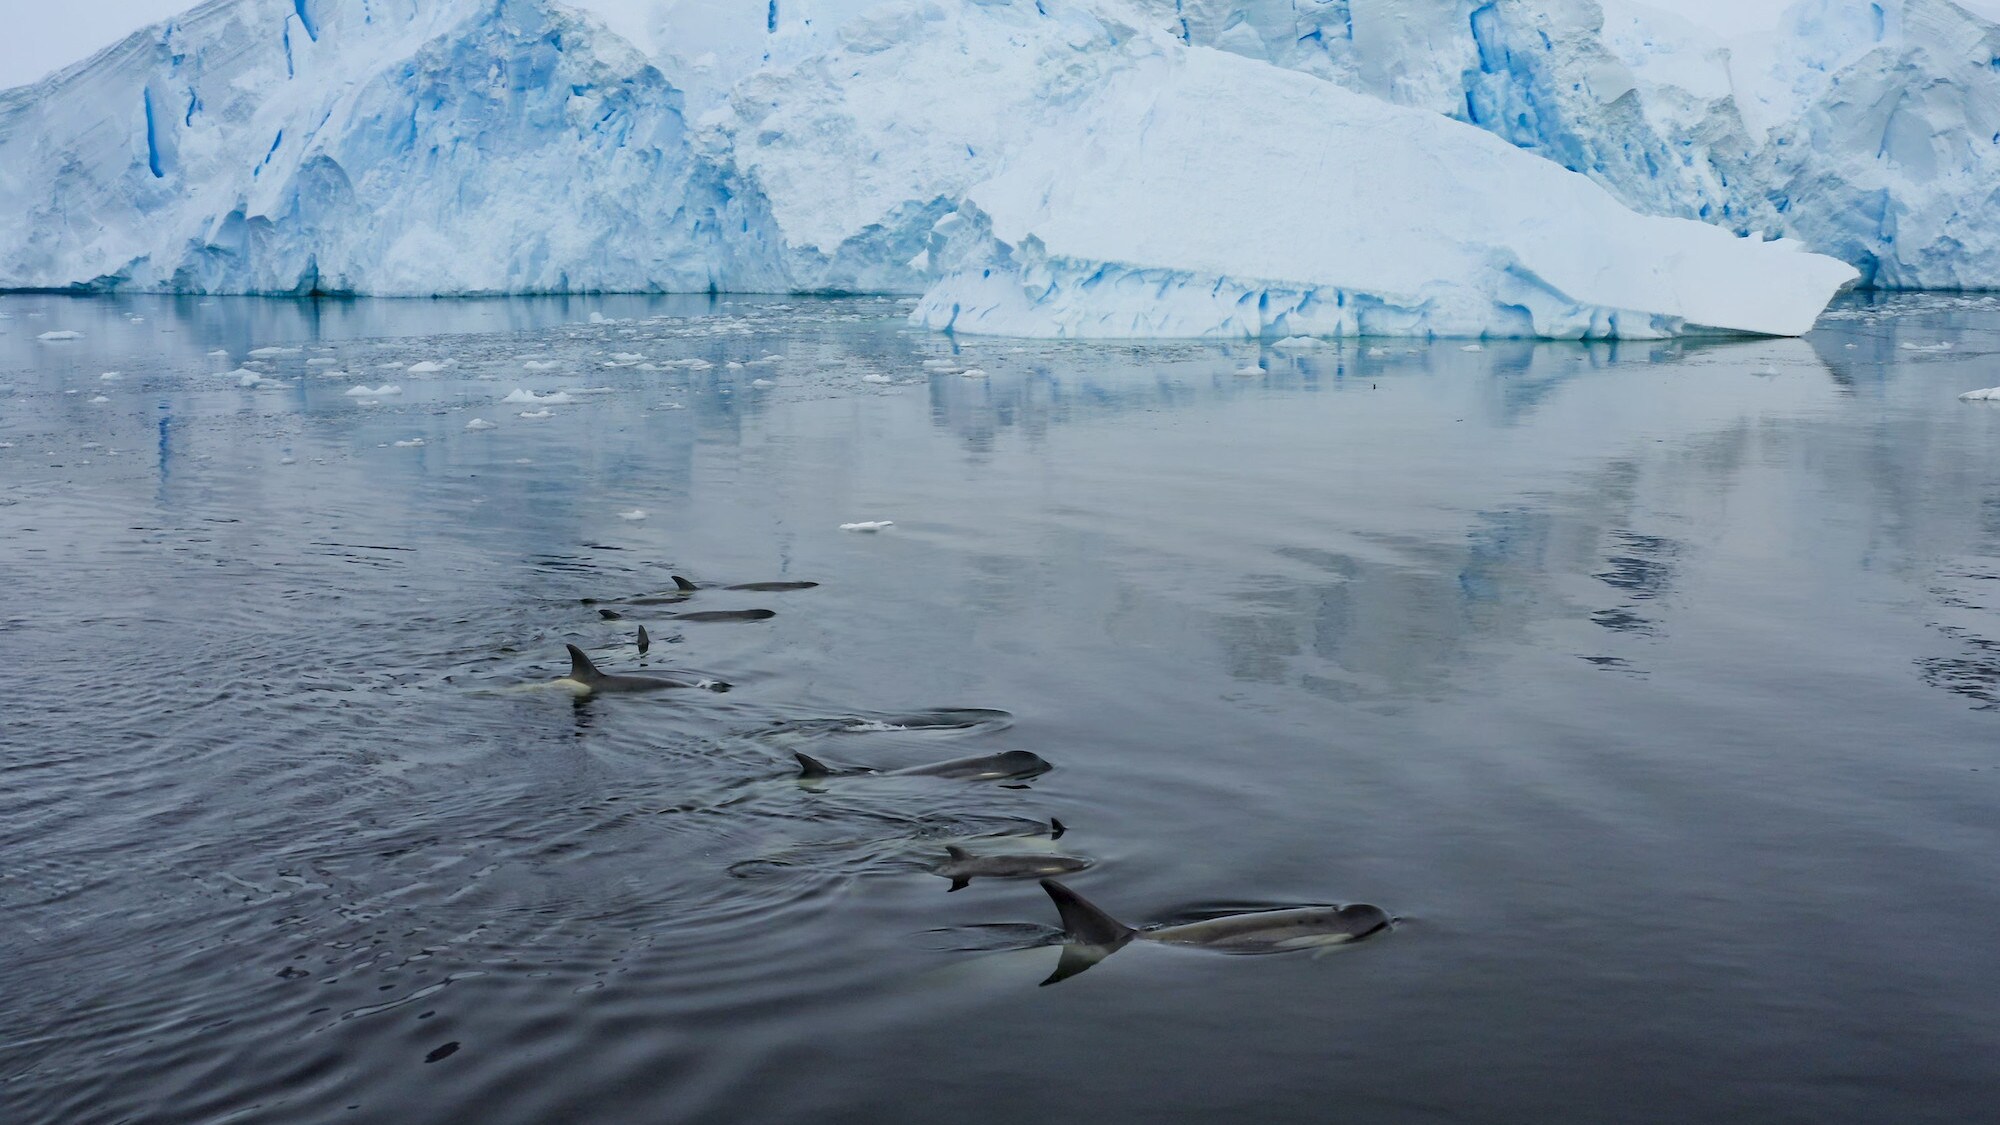 A pod of killer whales swimming along the water's surface in front of a glacier.  (credit: National Geographic for Disney+/Bertie Gregory)